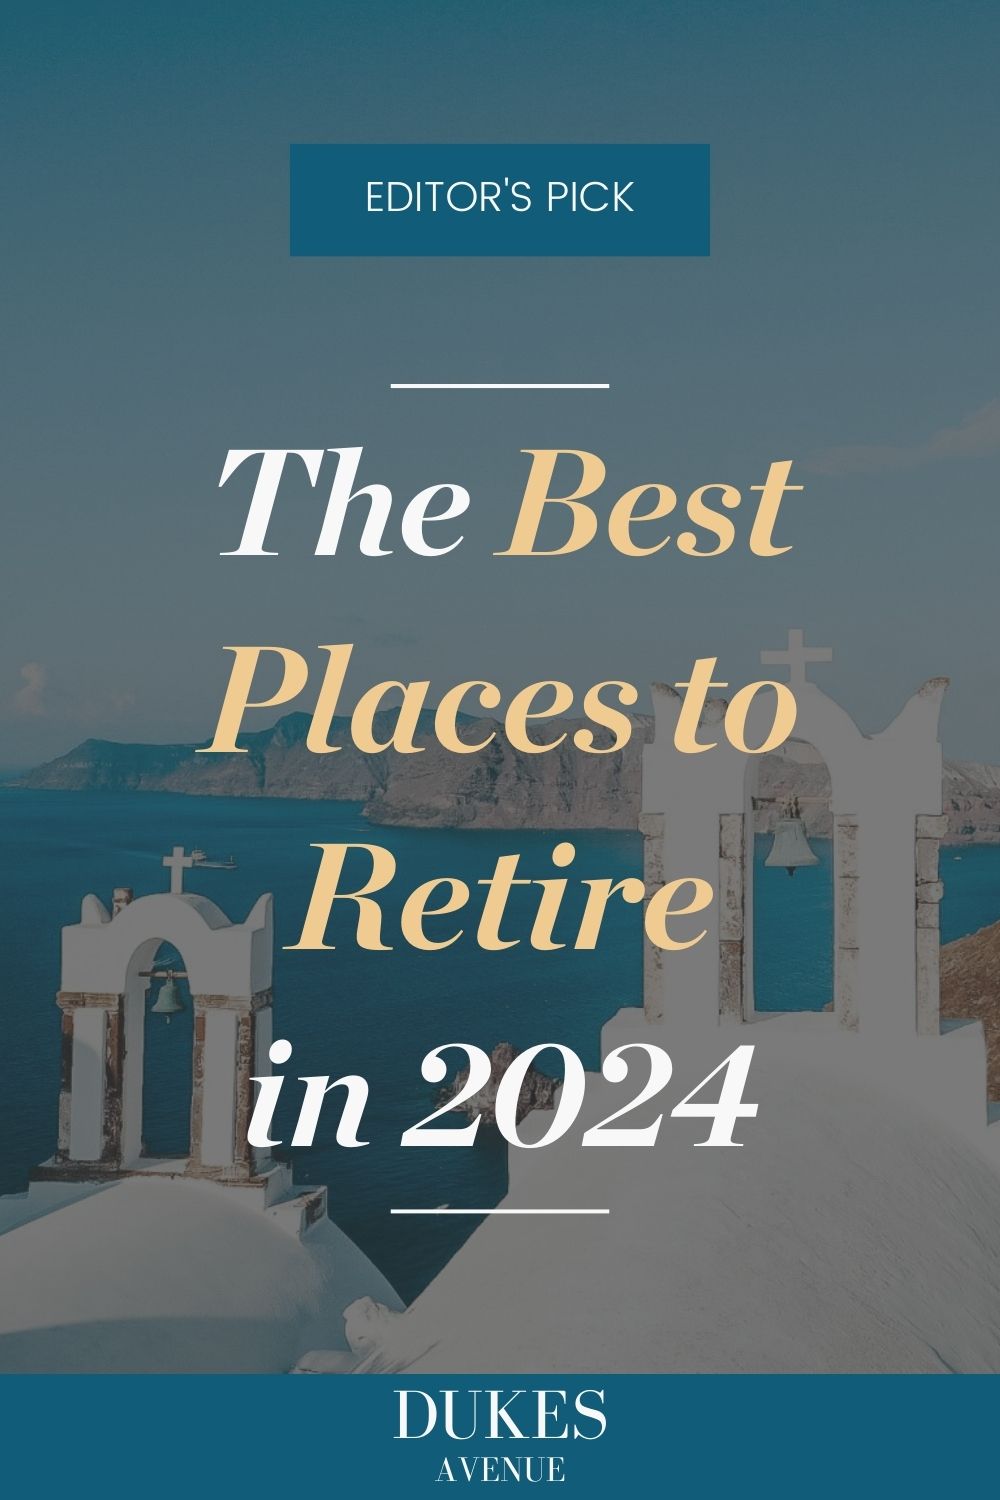 Image of rooftops in Santorini with text overlay 'The Best Places to Retire in 2024'